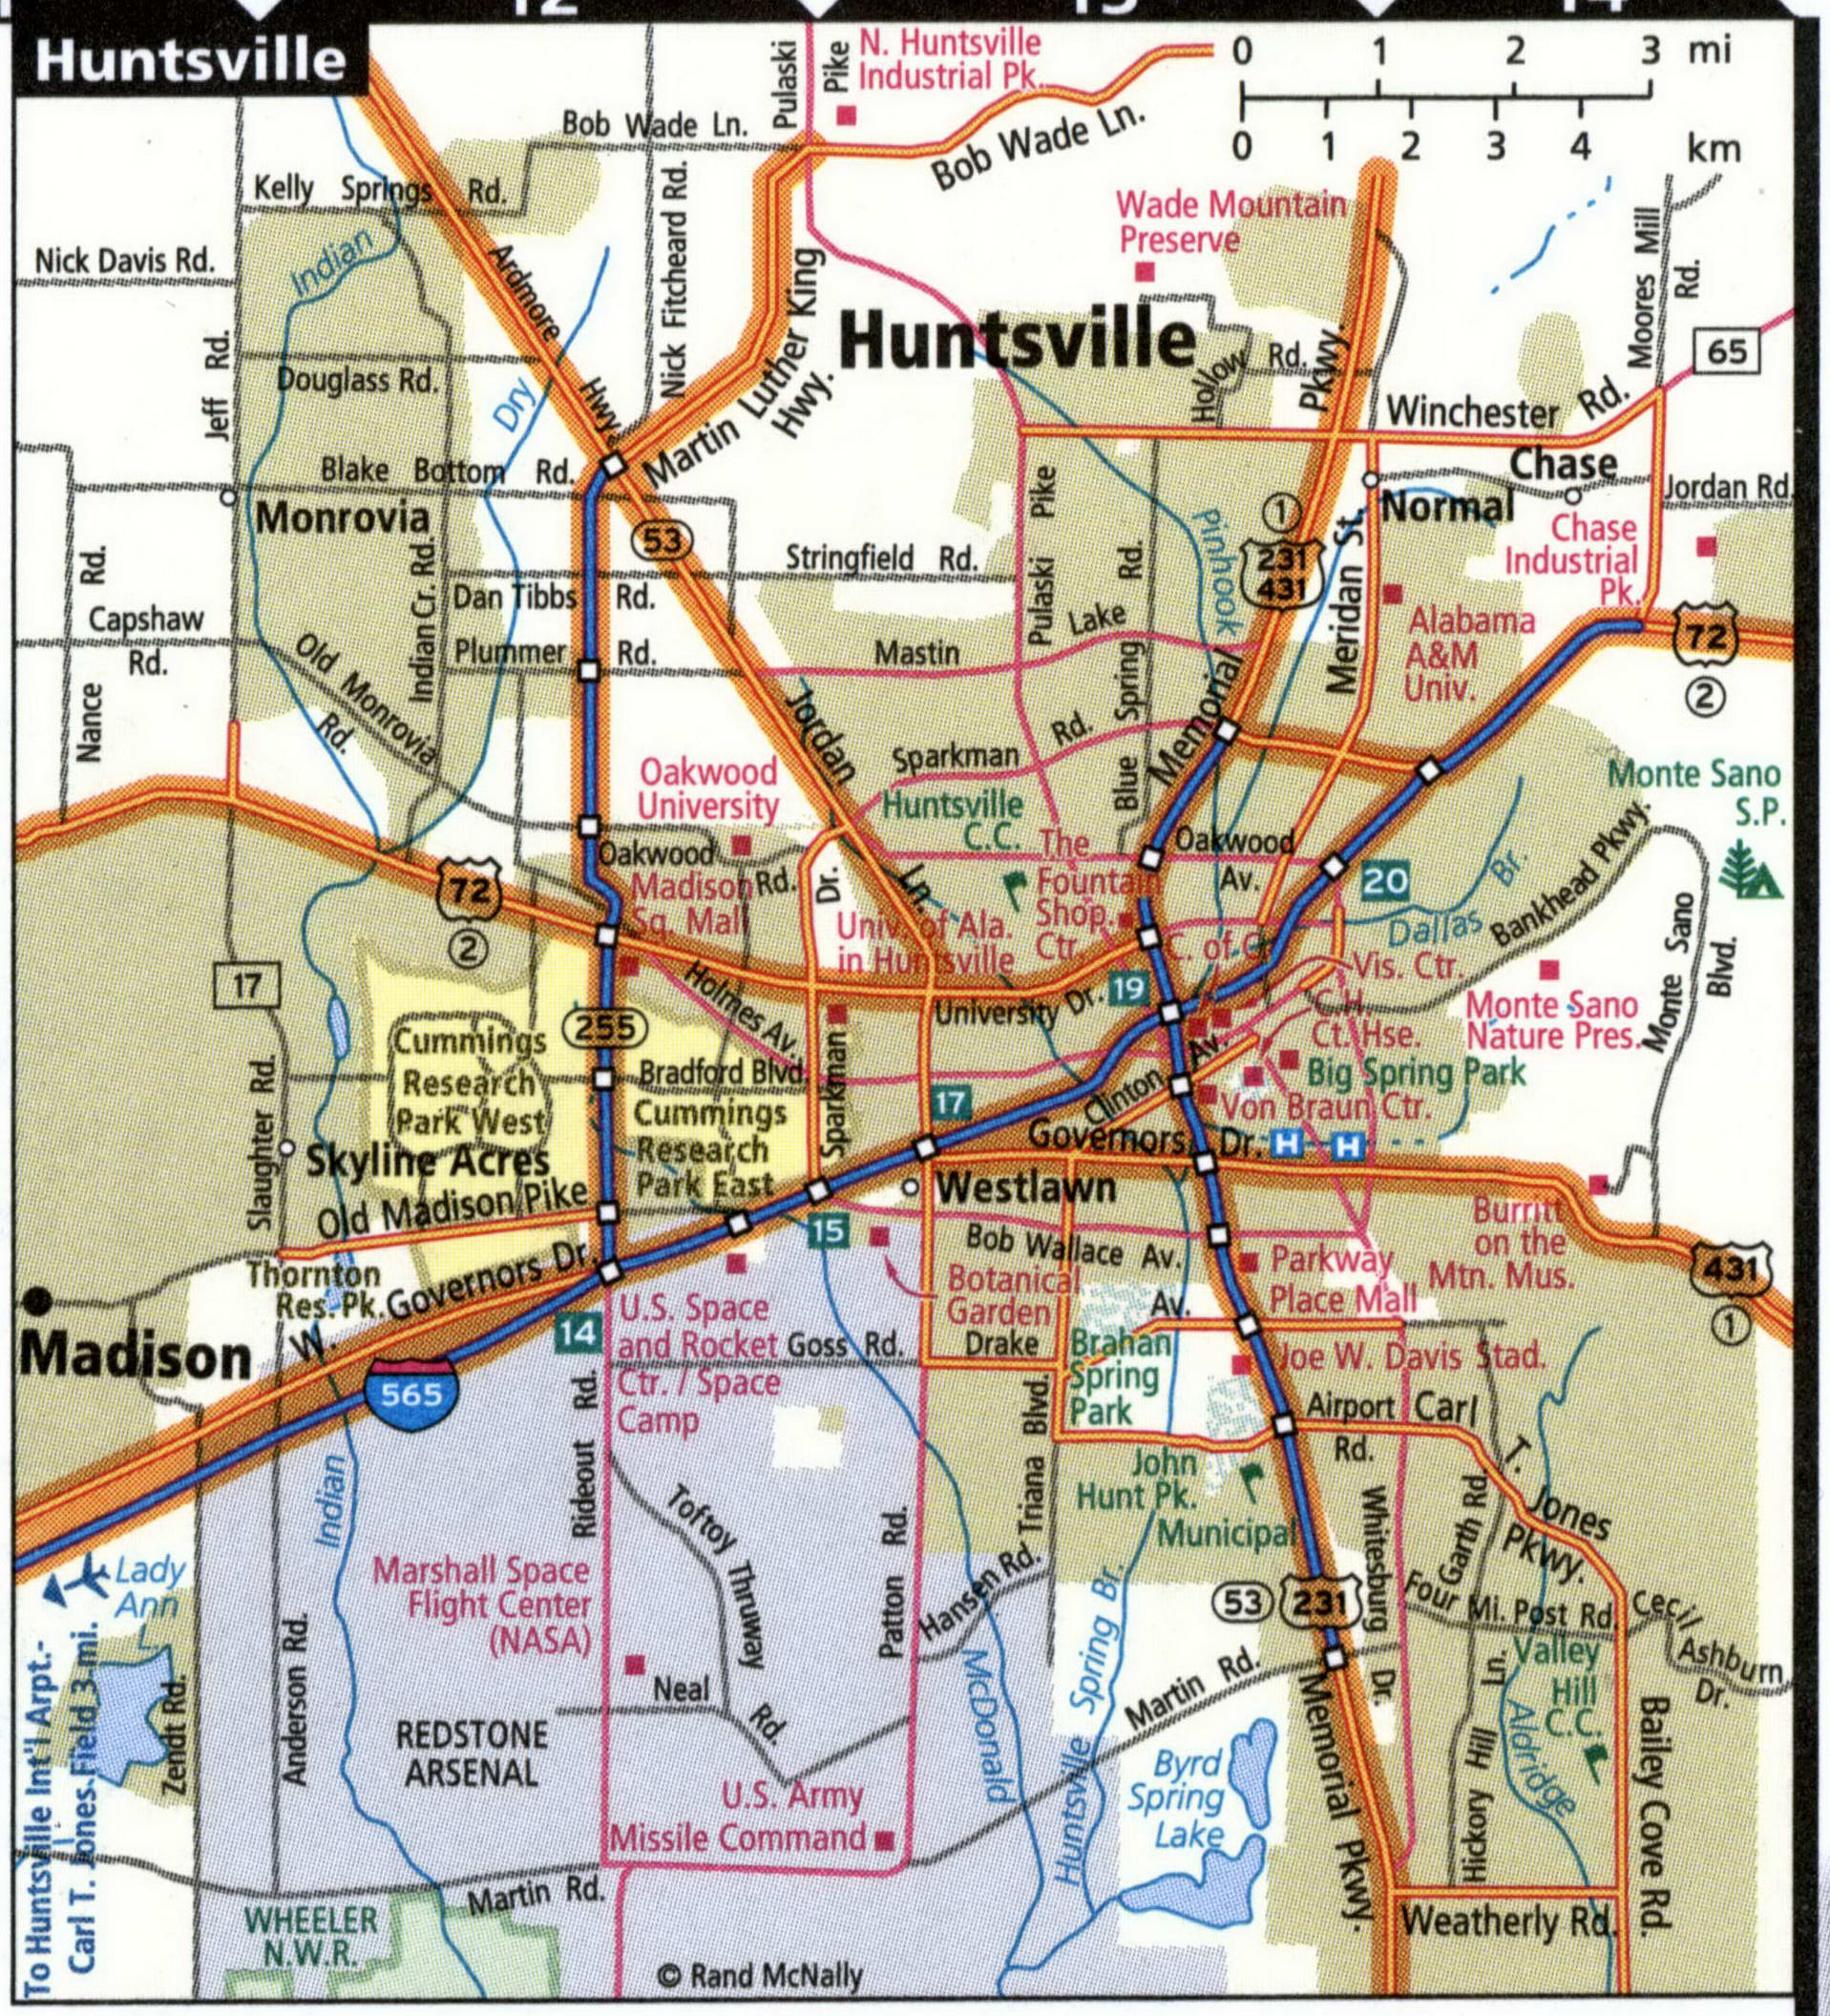 Huntsville city road map for truck drivers toll free highways map - usa